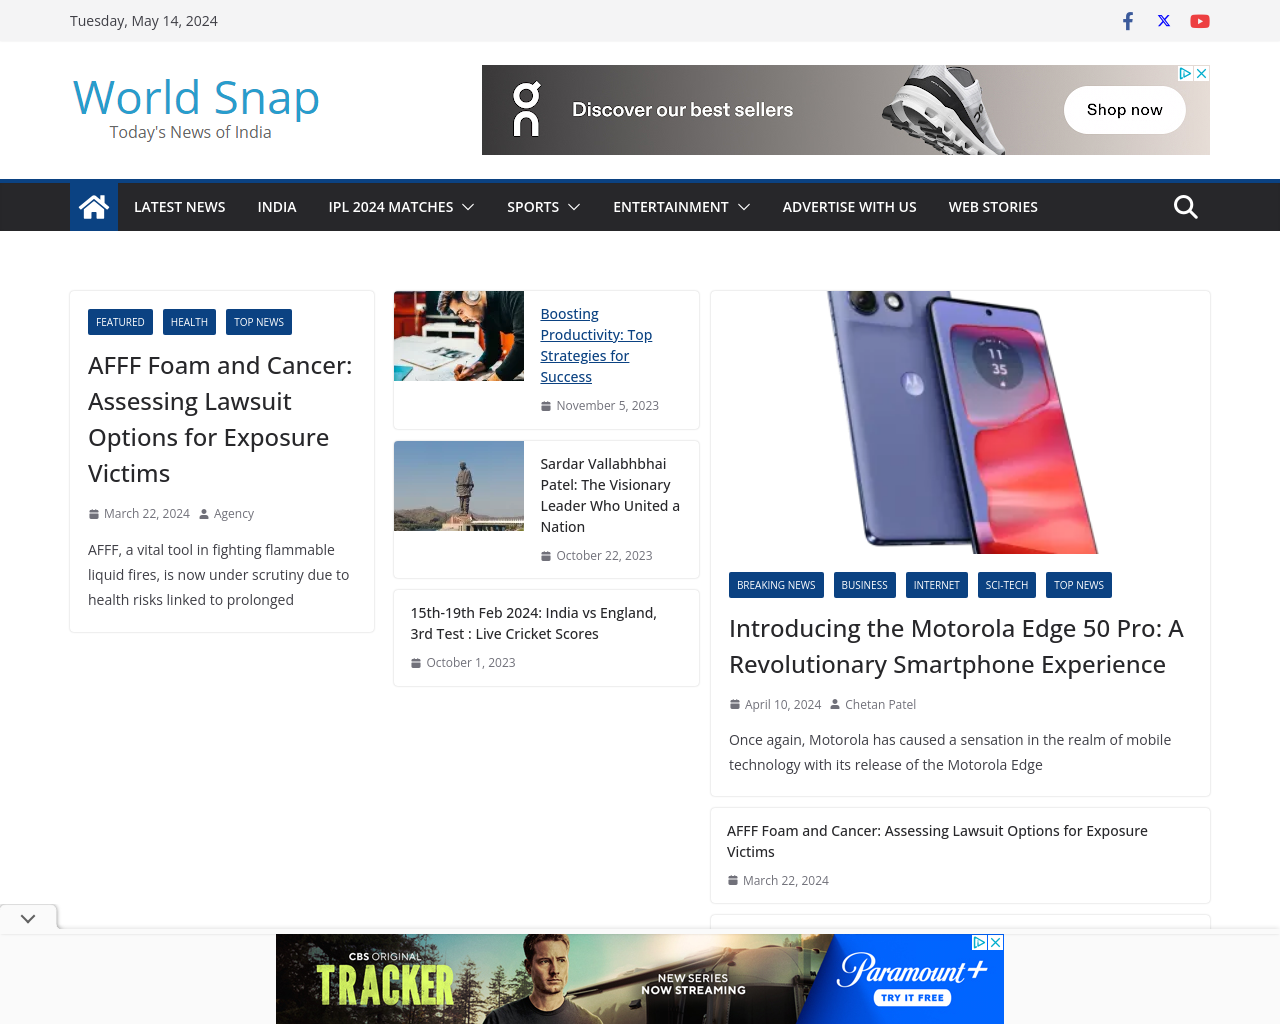 Worldsnap - One spot for News, Travels, Sports, Entertainment